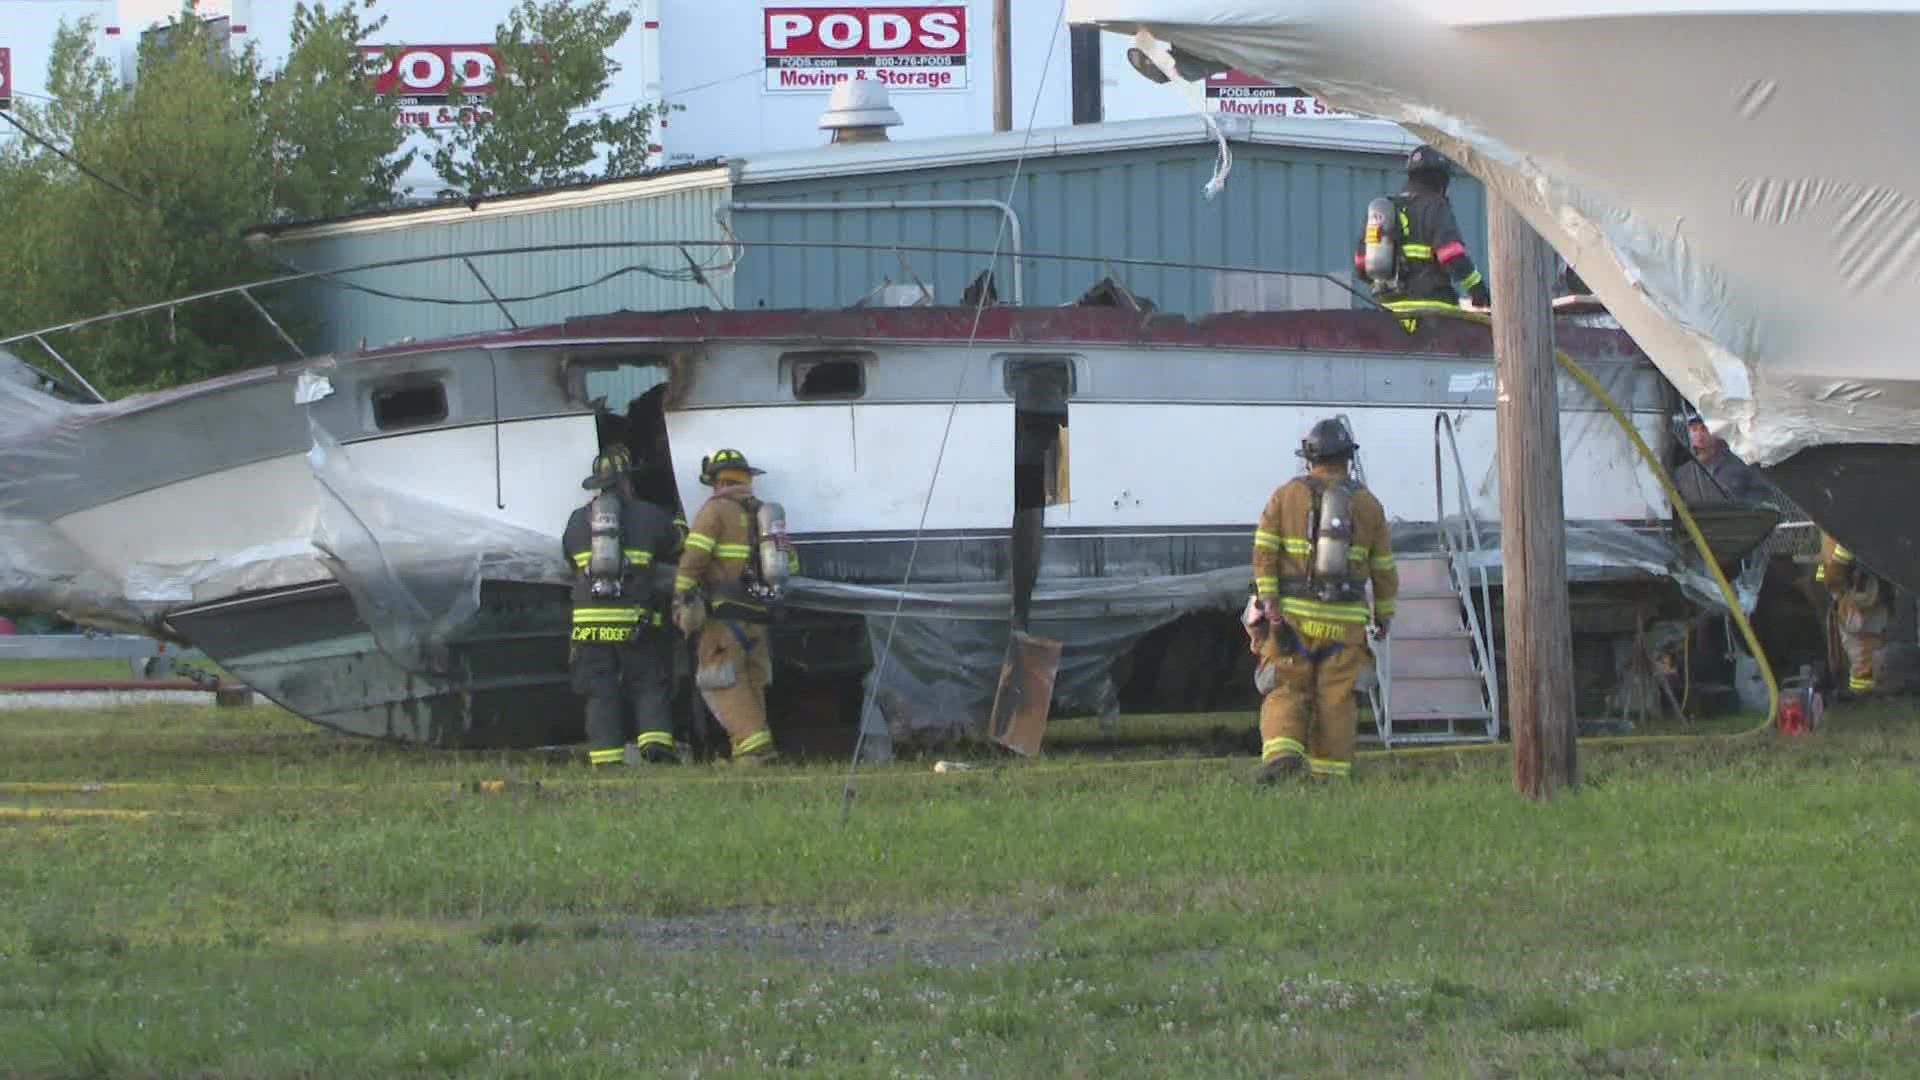 Fire crews responded to a boat fire at Spring Point Marina in South Portland on Saturday evening, July 31. It's unclear how the fire started.